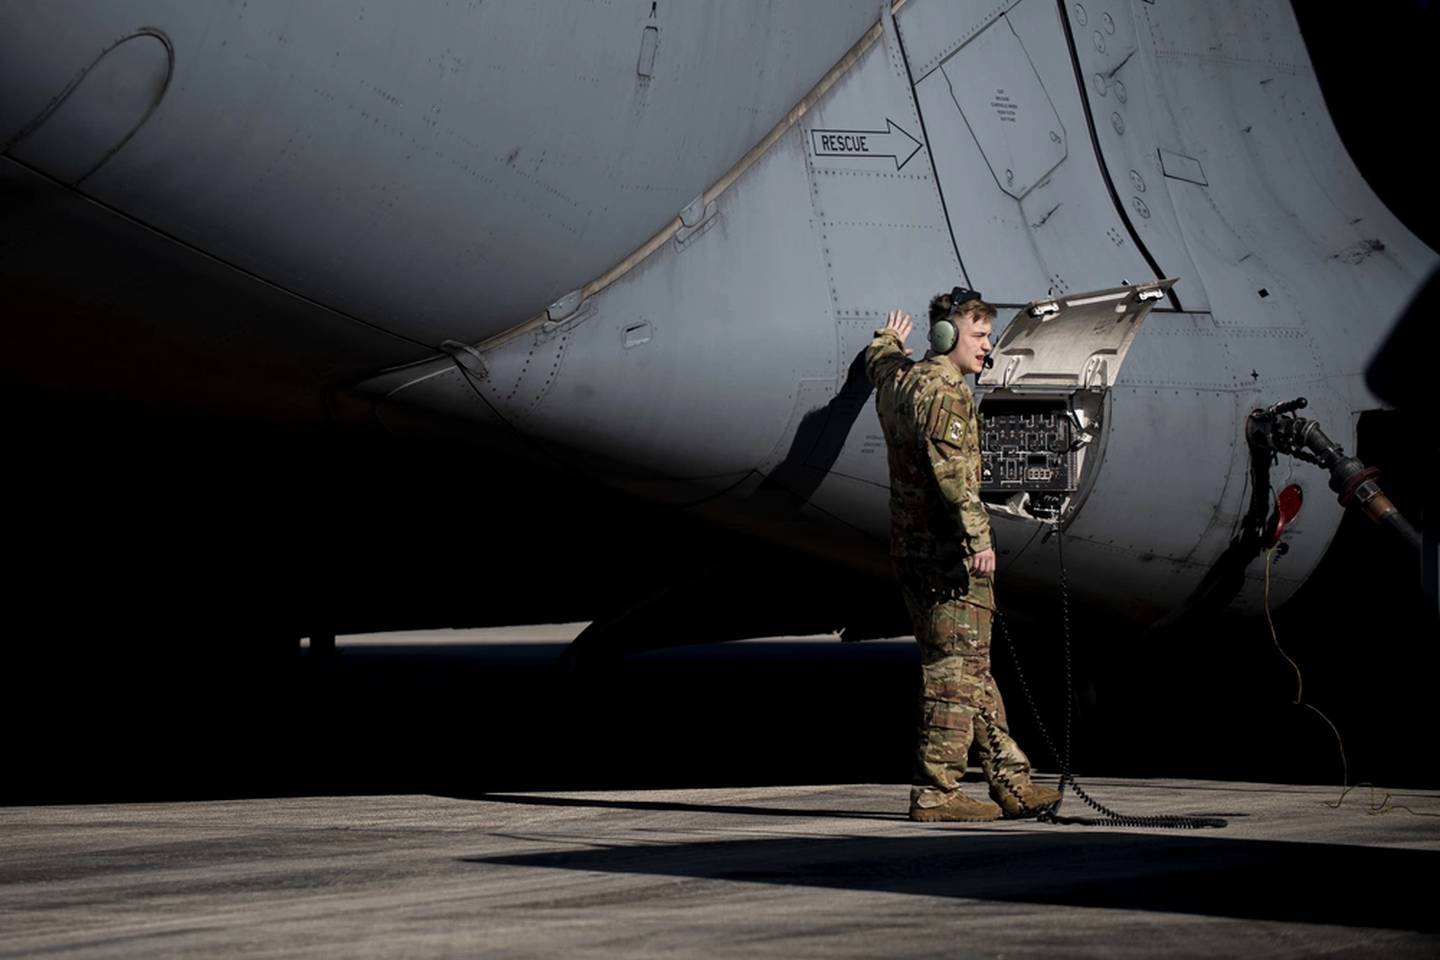 Then-Senior Airman Duncan Copley, a C-17 Globemaster III loadmaster from the 3rd Airlift Squadron at Dover Air Force Base, Delaware, transfers fuel from a C-17 to an R-11 fuel truck during Exercise Razor Talon 21-1 at Marine Corps Air Station Cherry Point, North Carolina, Dec. 2, 2020. The transferred fuel was later used to refuel four F-15E Strike Eagles. (Senior Airman Jacob Derry/Air Force)